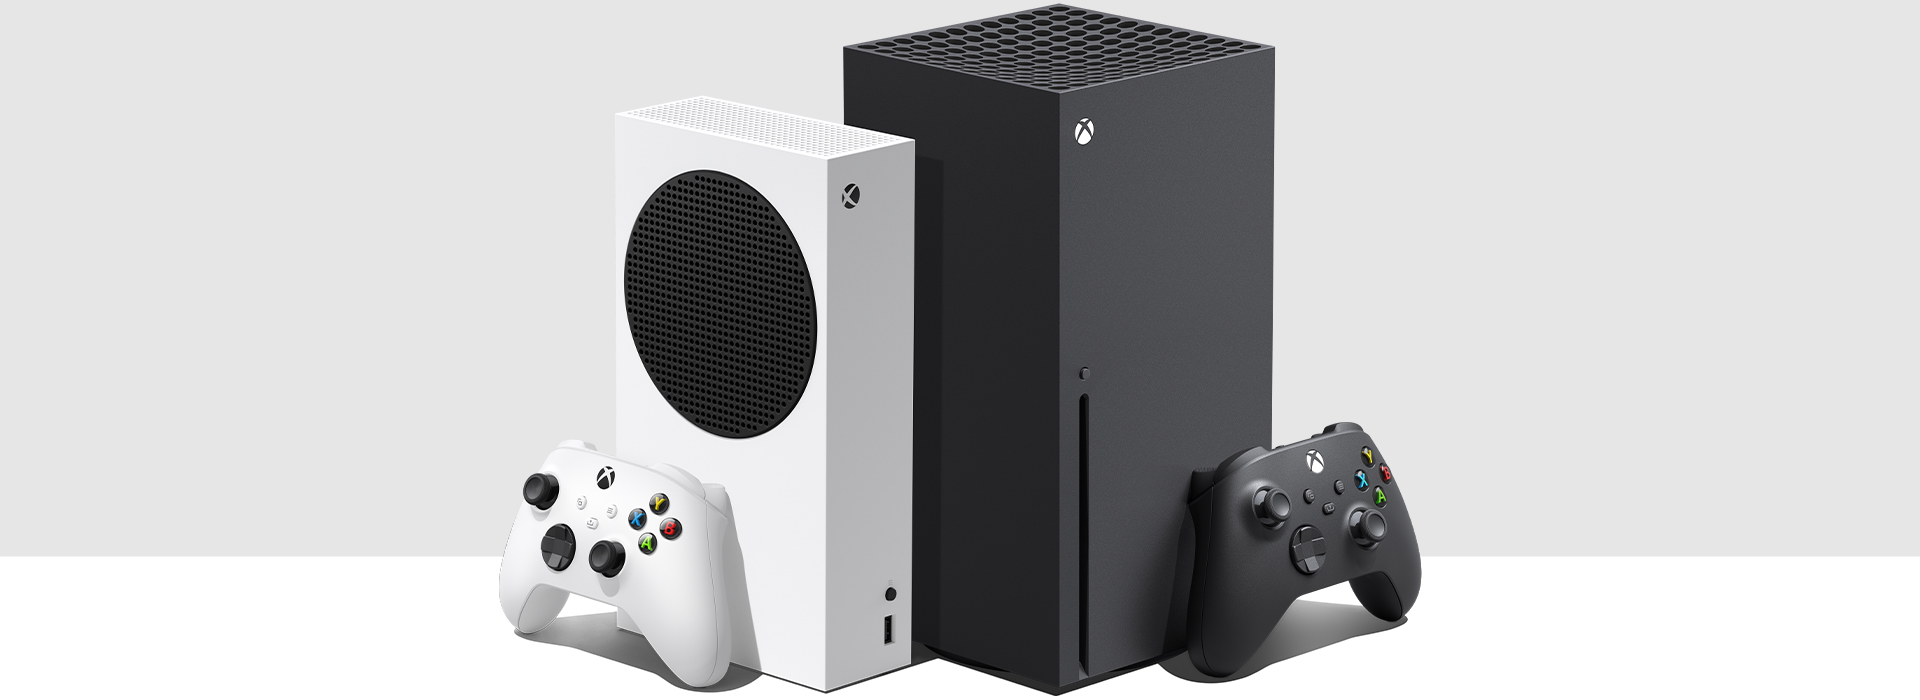 Xbox Series S and Xbox Series X consoles side by side.